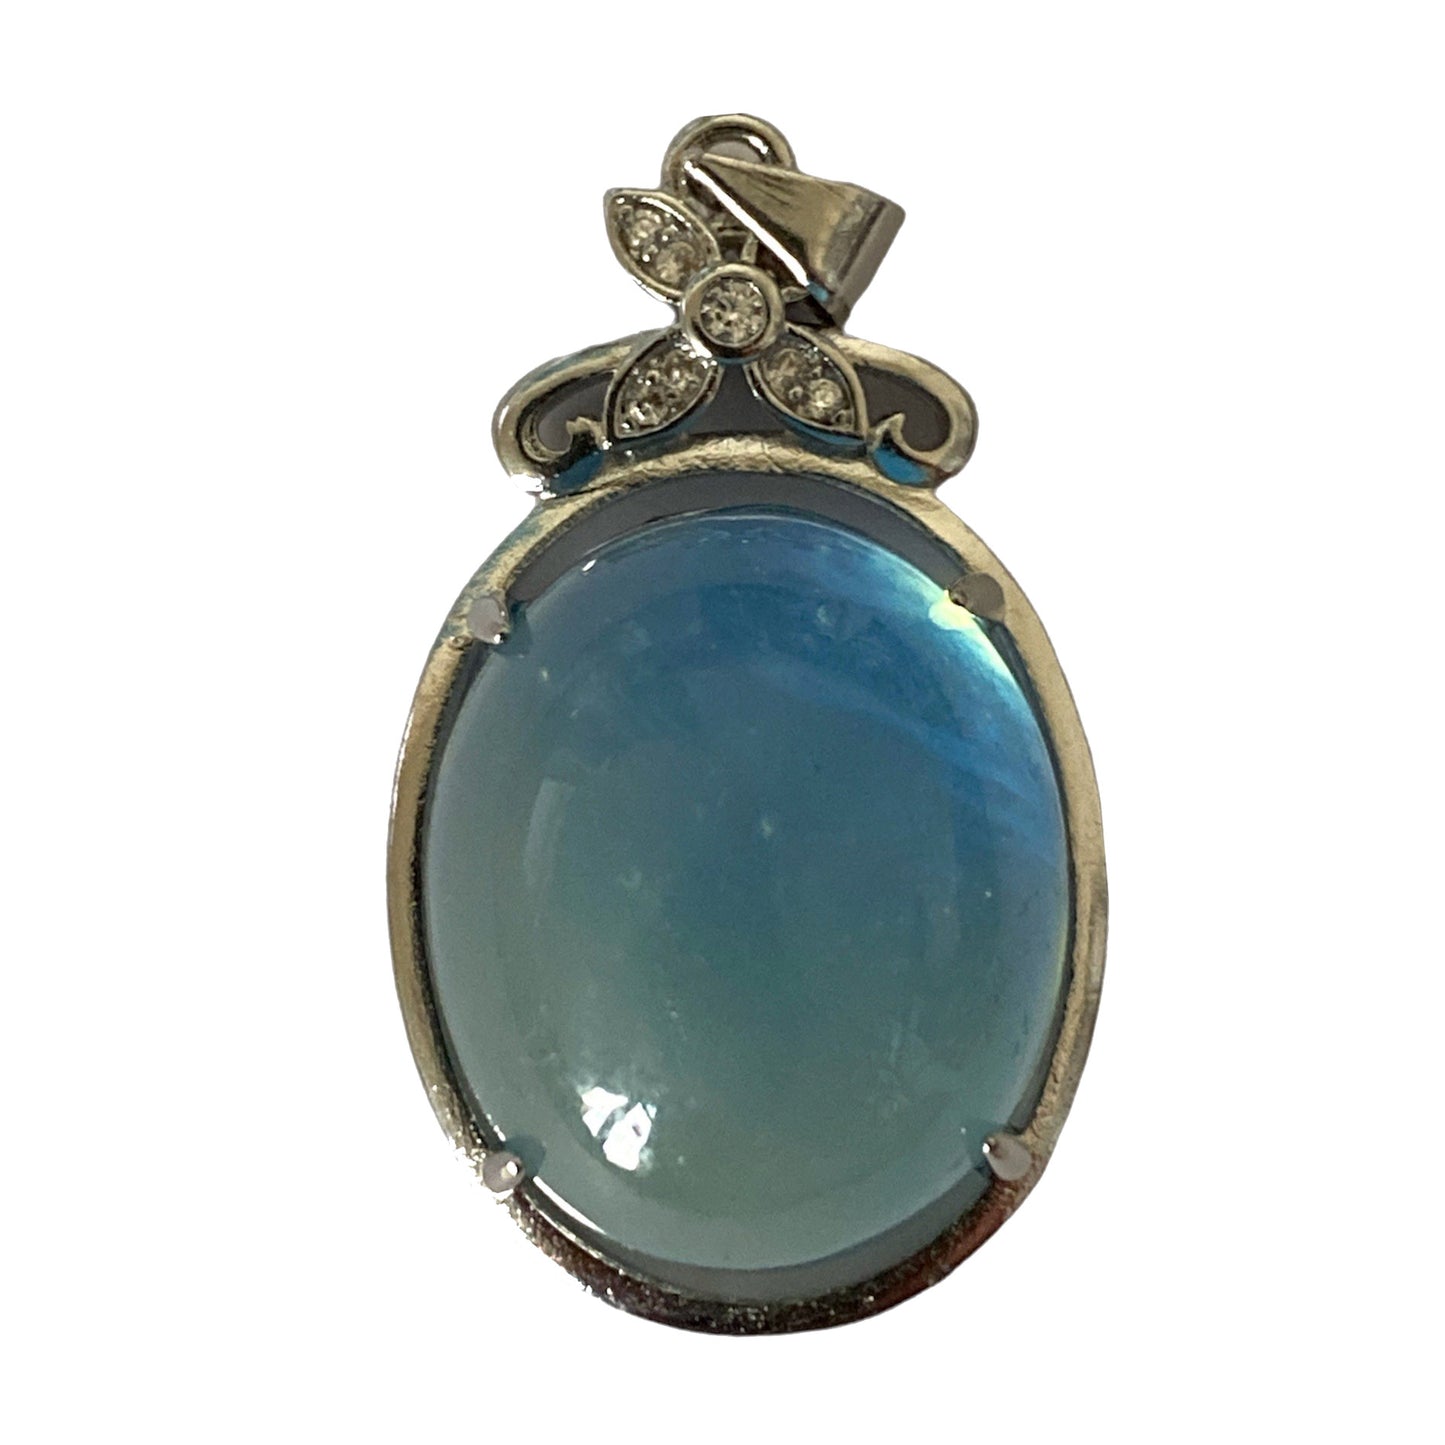 Aquamarine Oval Pendant with Rhinestones - Silver Color Plated Metal - 30x19mm - China - NEW922